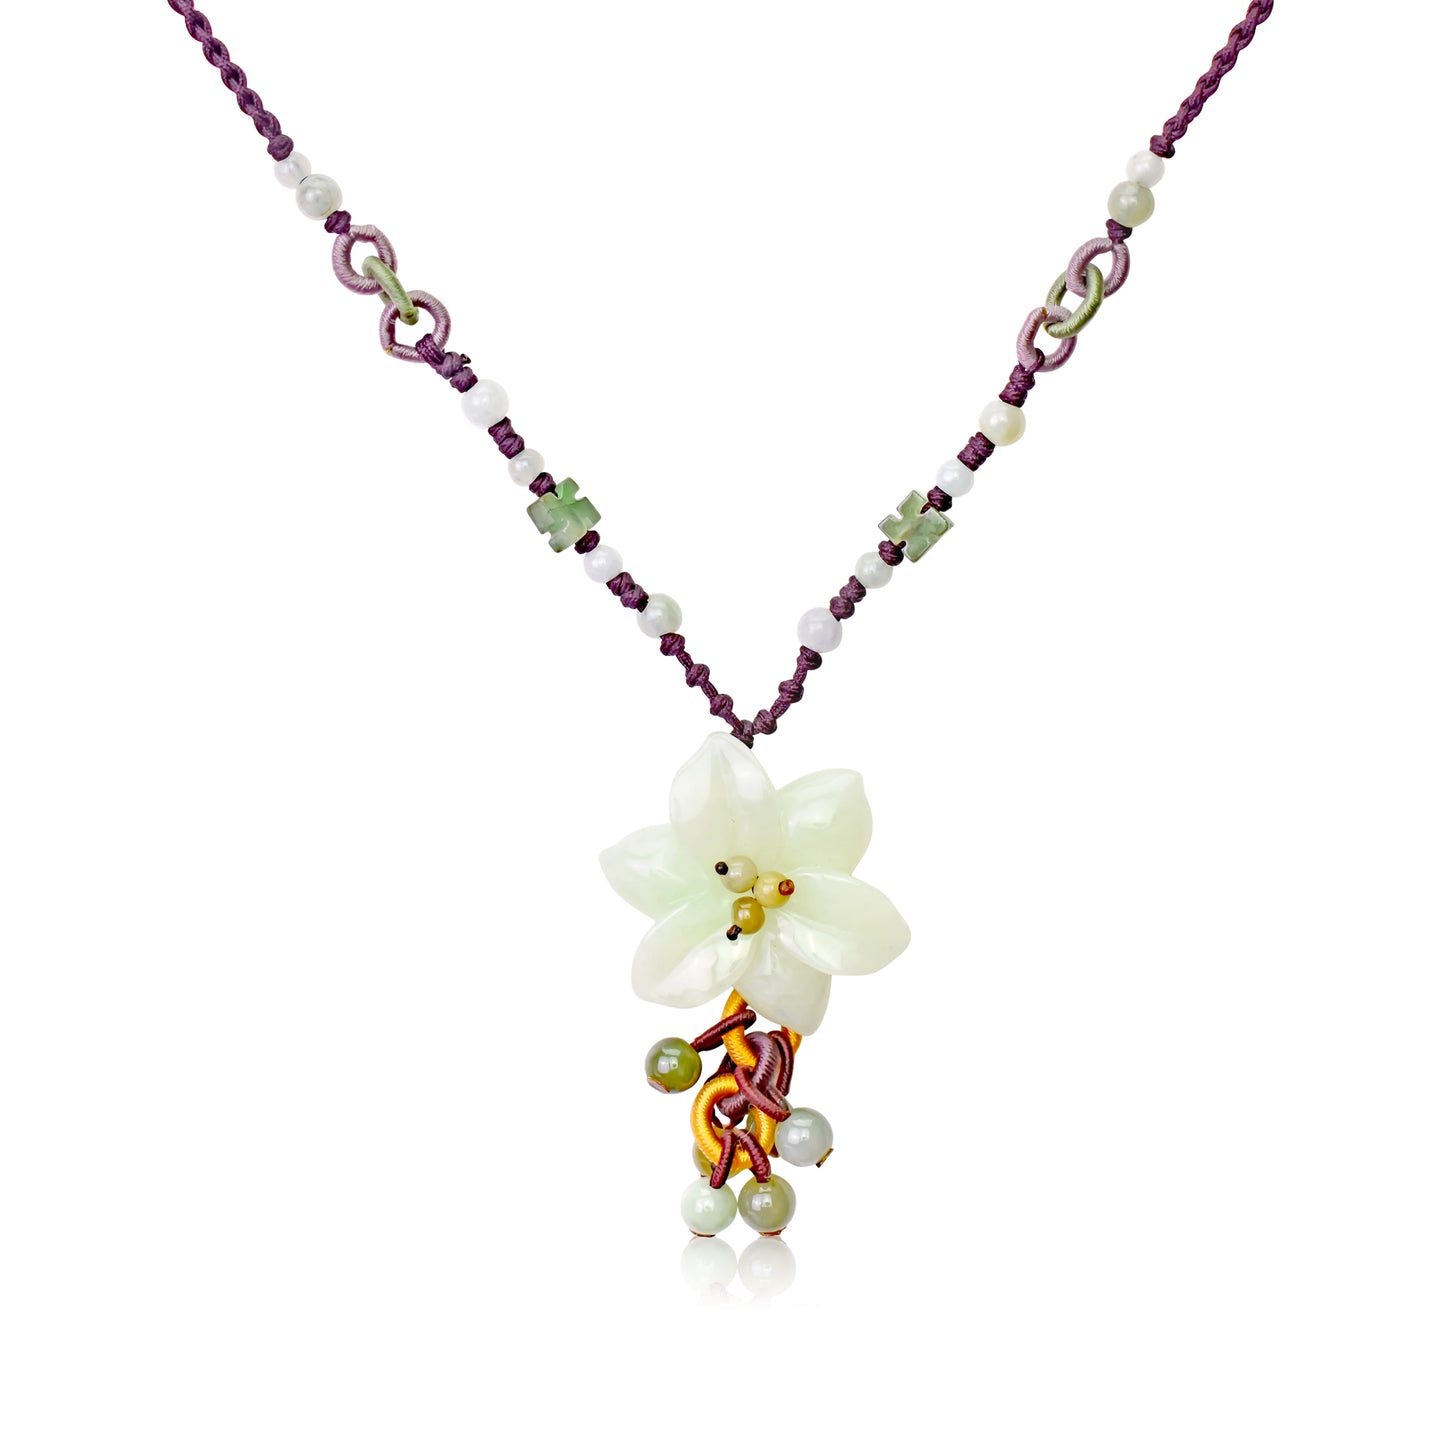 Experience Gracefulness with Pear Blossom Flower Honey Jade Necklace made with Brown Cord